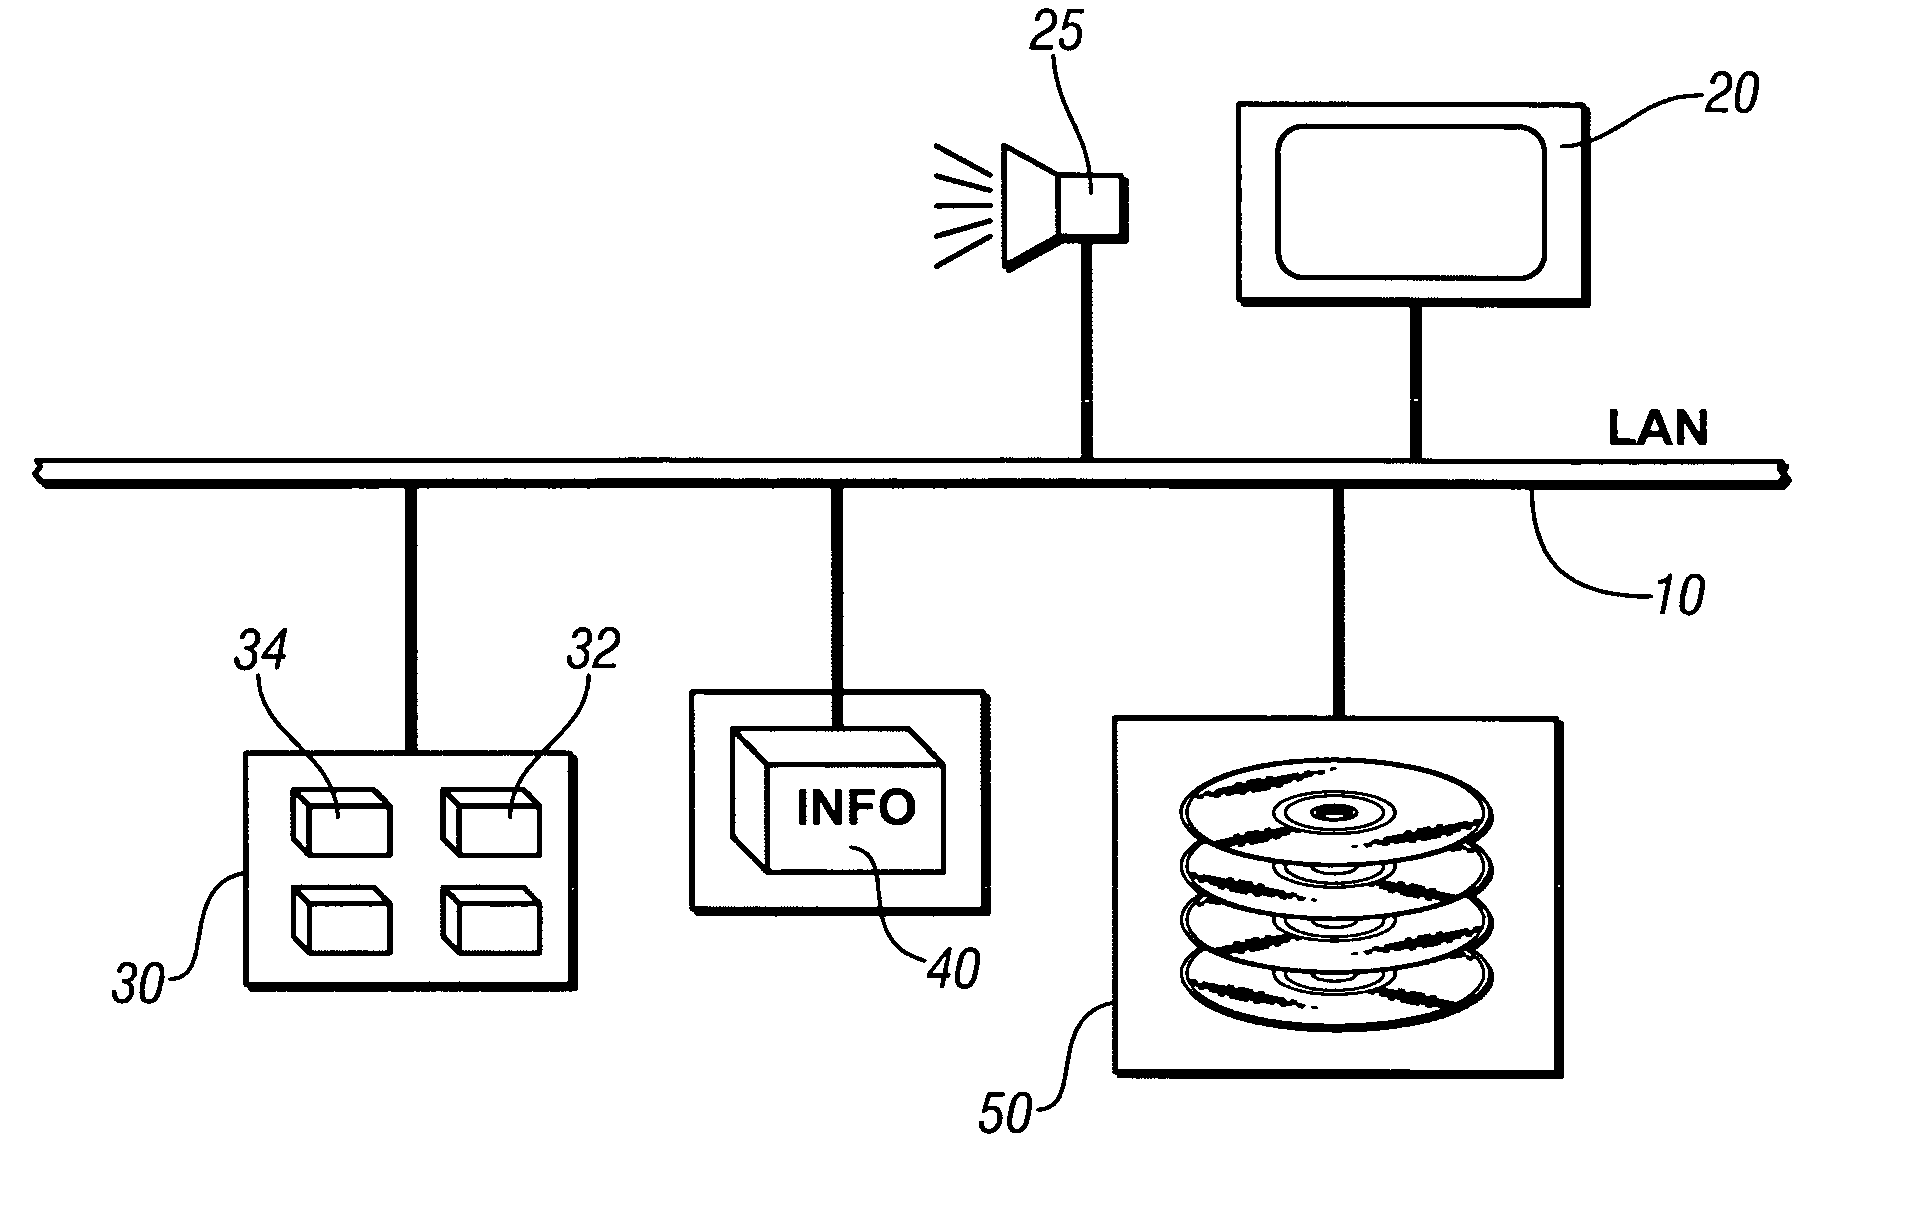 Method and apparatus to provide vehicle information to a requestor